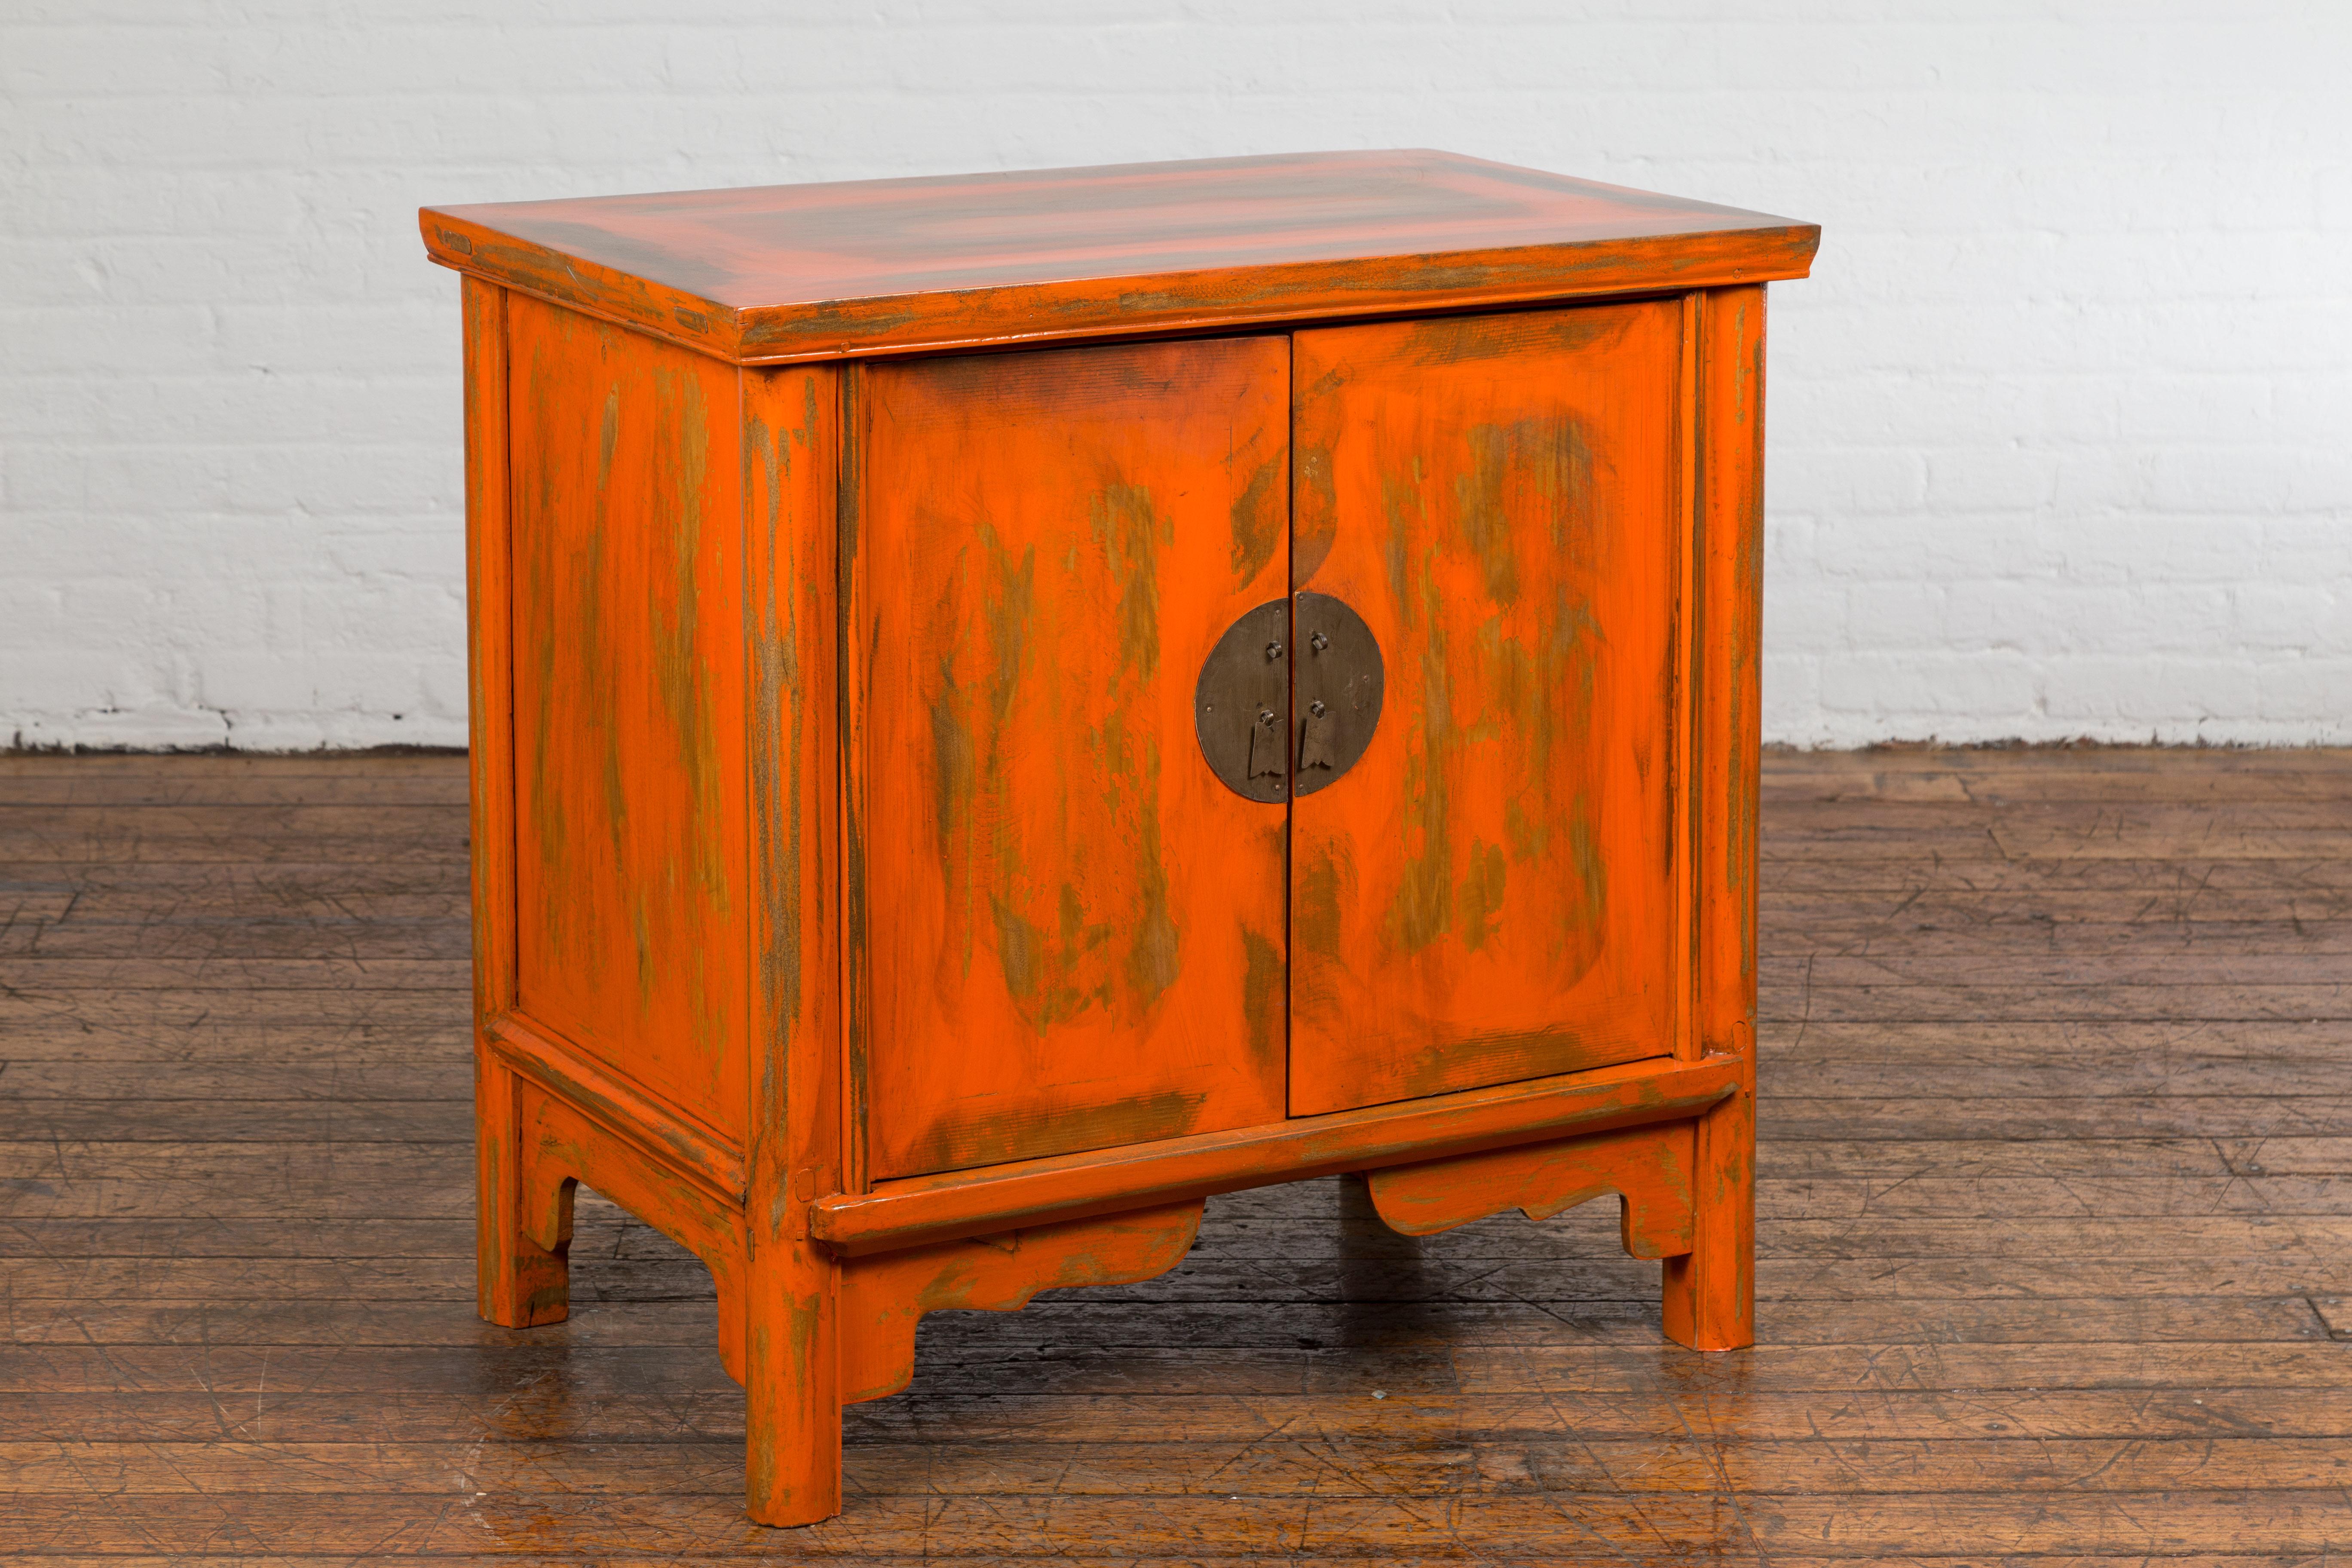 A Chinese late Qing Dynasty period elmwood side cabinet from the early 20th century with new custom distressed orange lacquer, two doors, brass hardware, carved spandrels and straight feet. This Chinese late Qing Dynasty period elmwood side cabinet